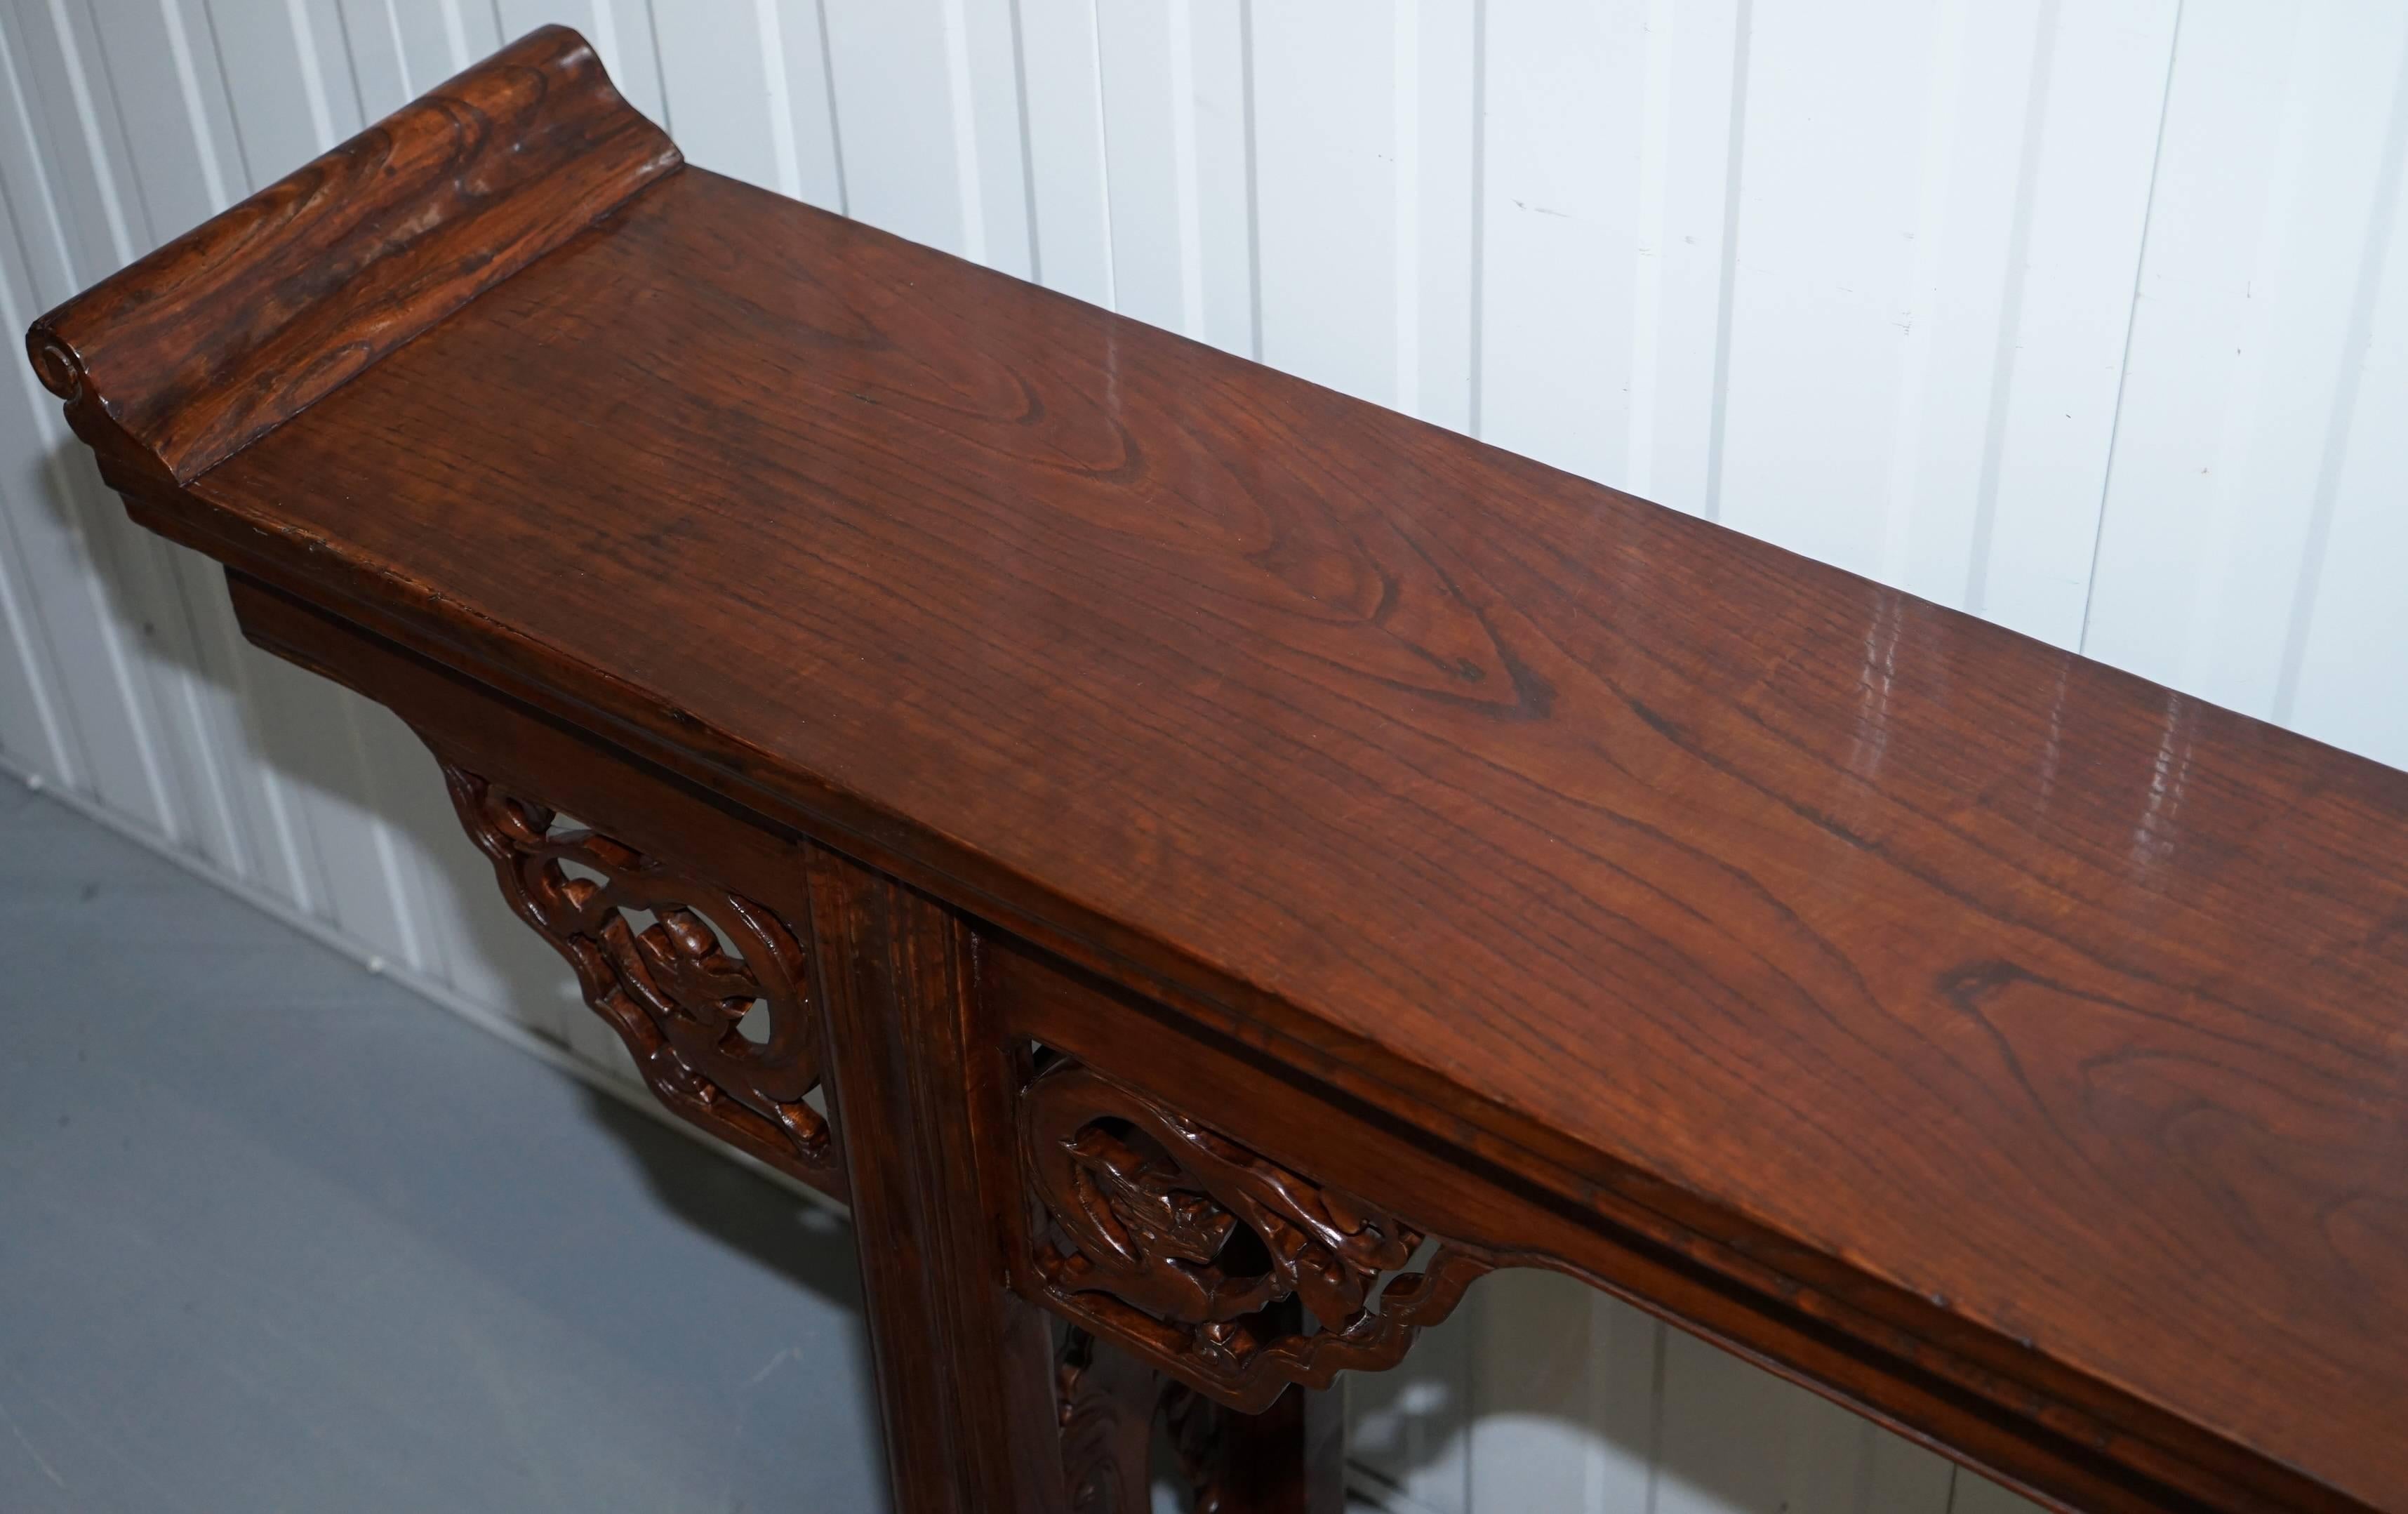 Chinese Export 19th Century Chinese Elm Alter Table with Dragon Carved Detailing Large Ornate